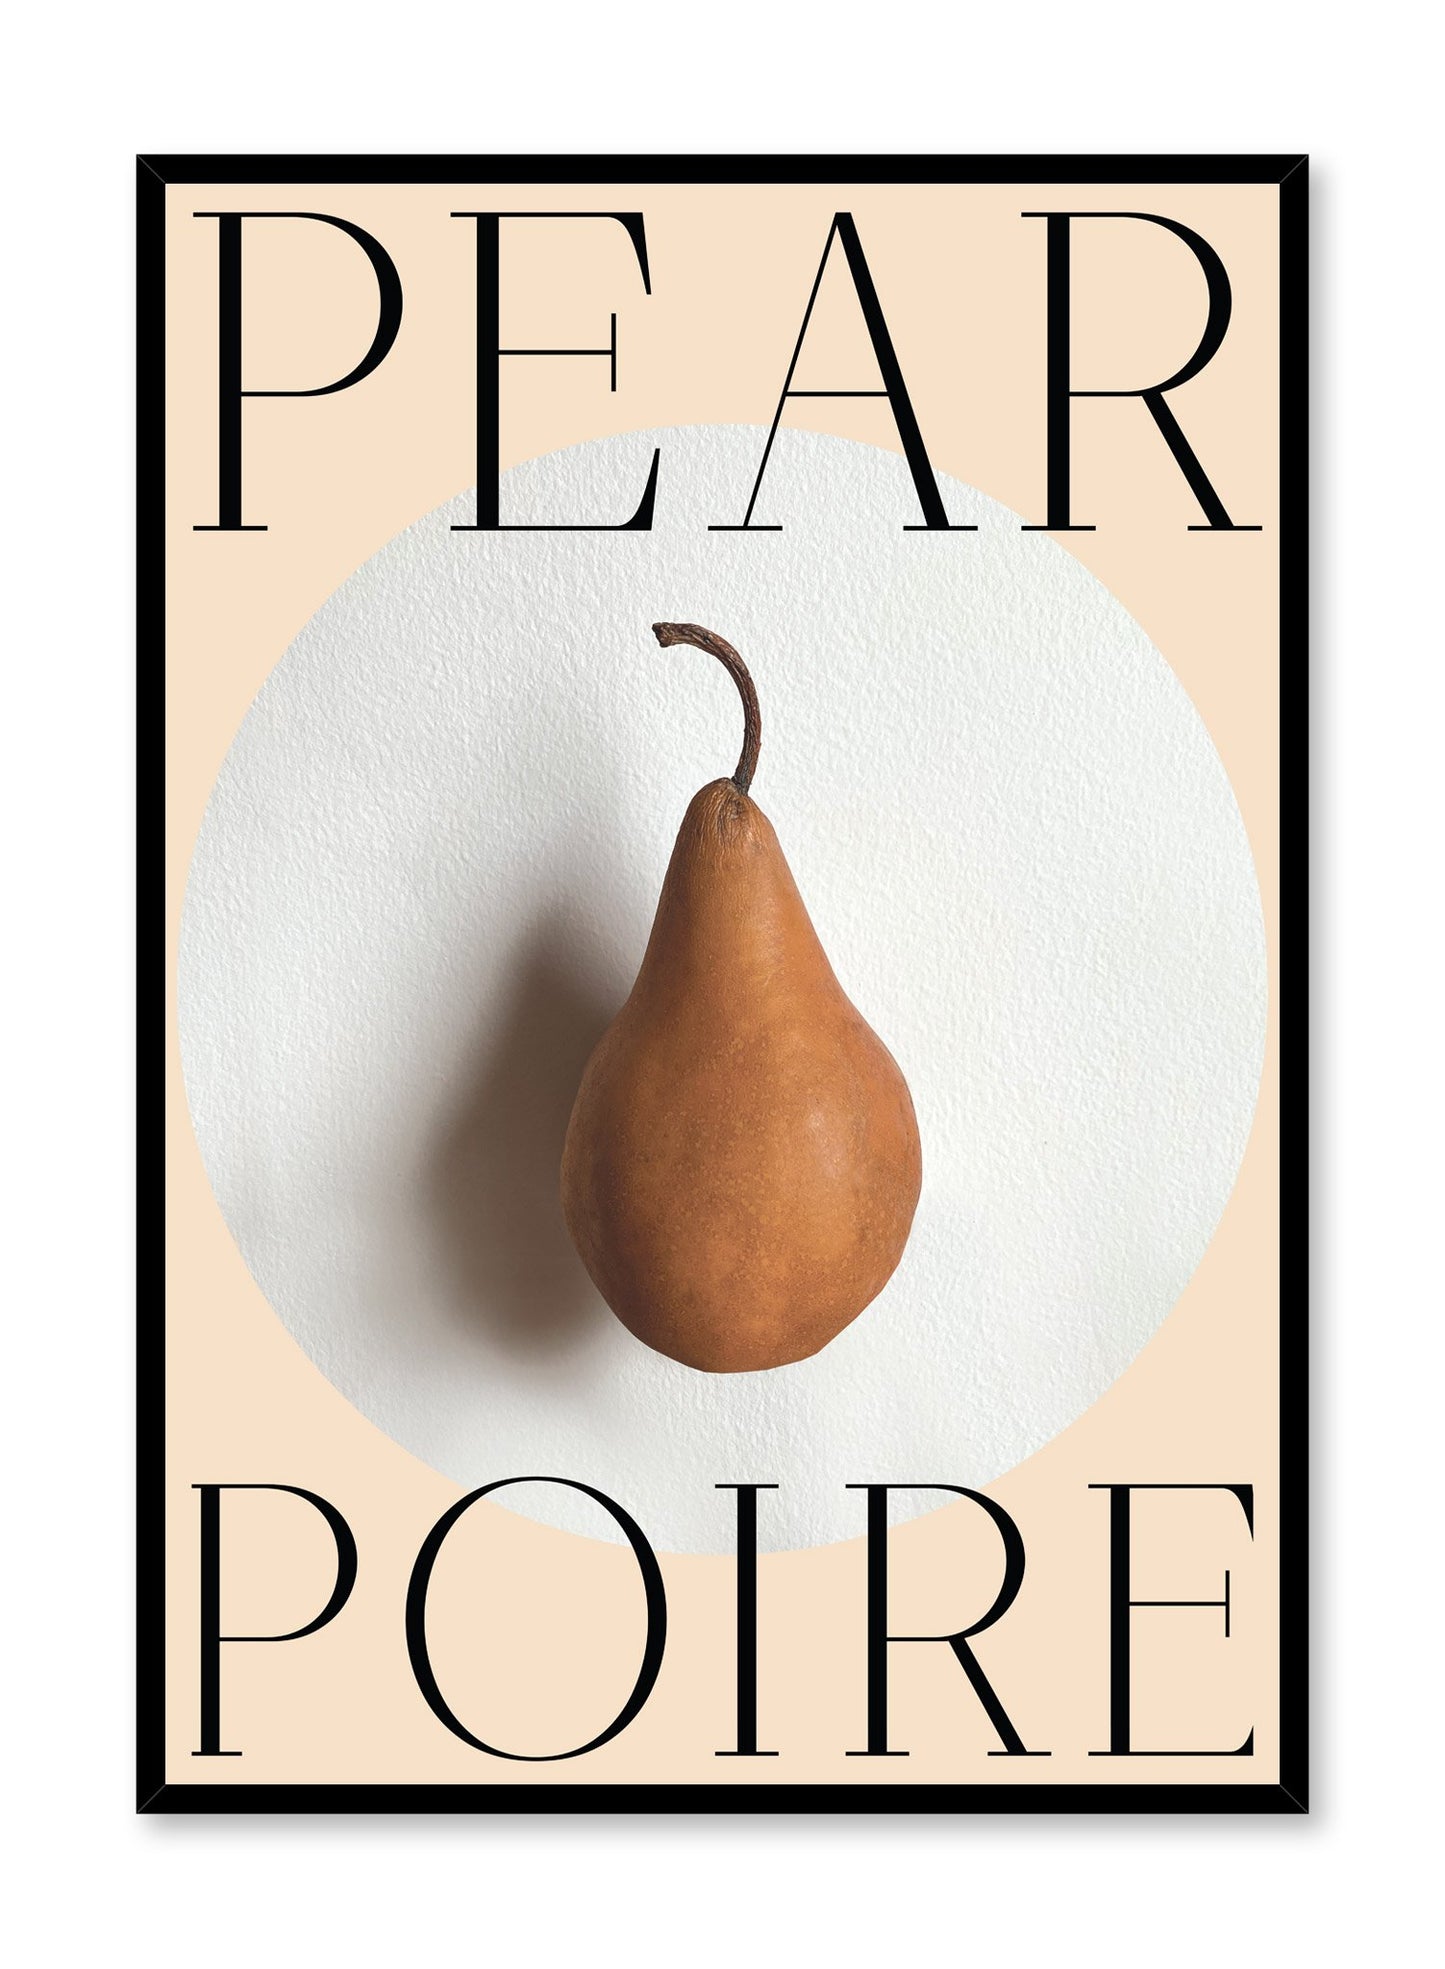 Perfect Pear is a still life fruit photography and typography poster by Opposite Wall.